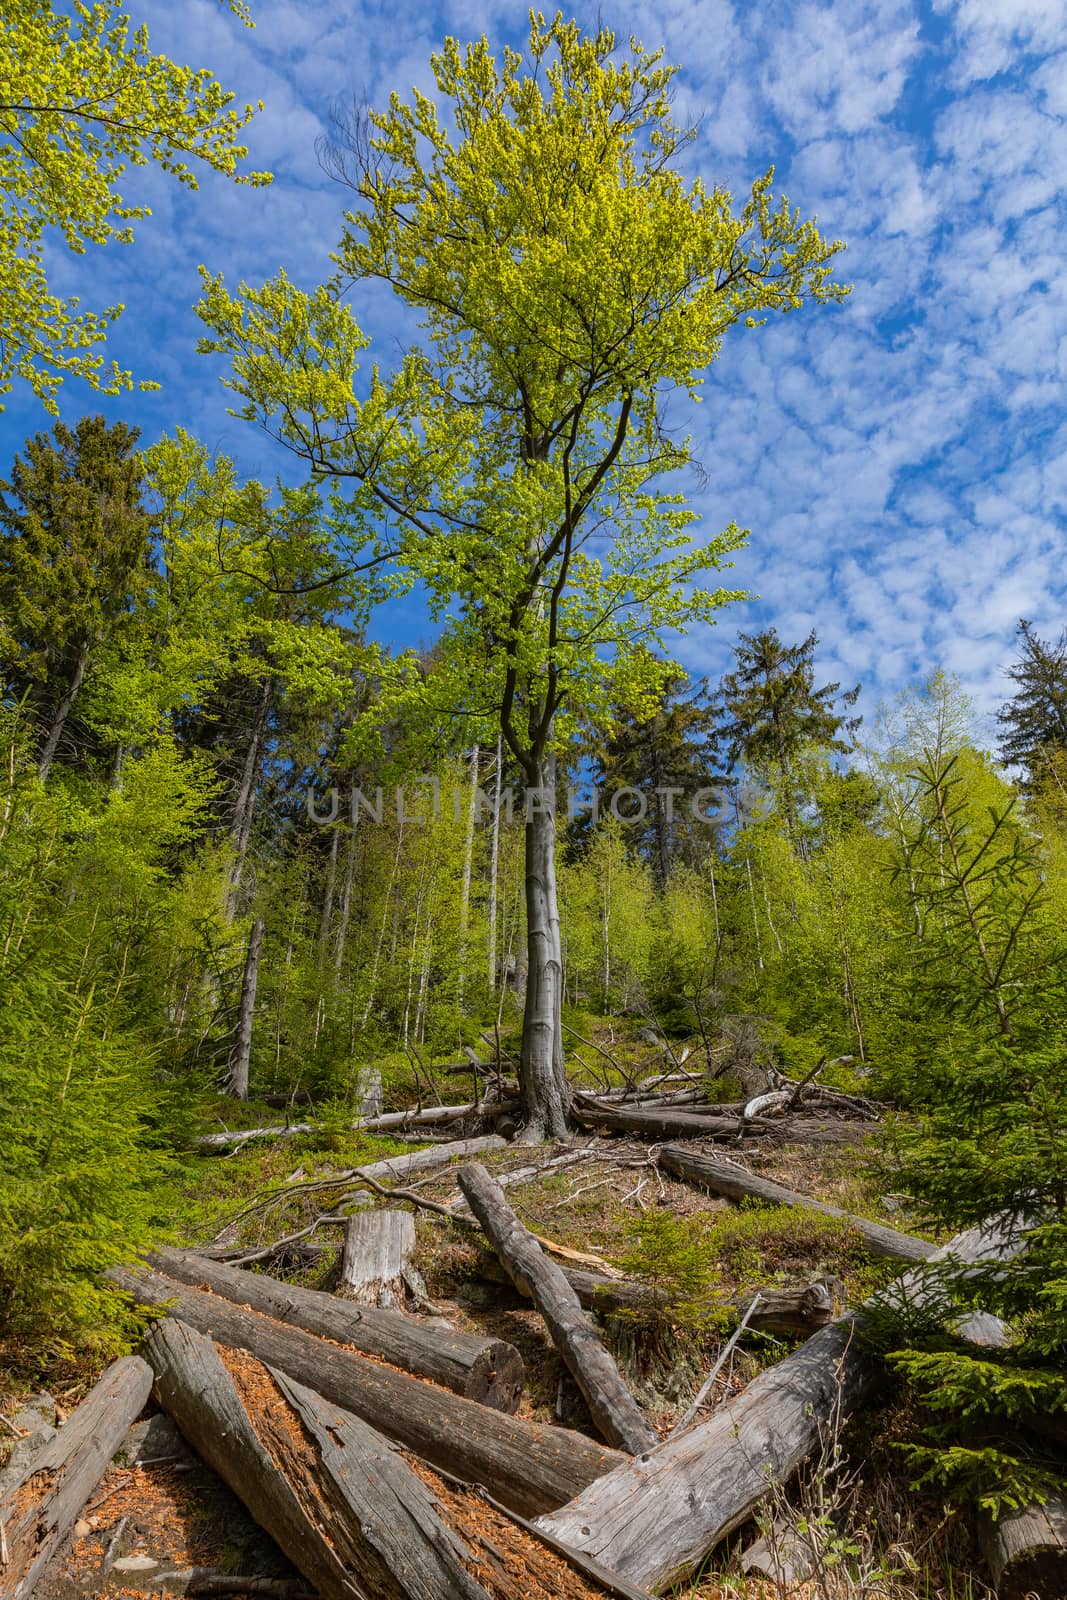 Forest in Stolowe Mountains National Park in Kudowa-Zdroj, Poland. A popular destination for trips in Poland.